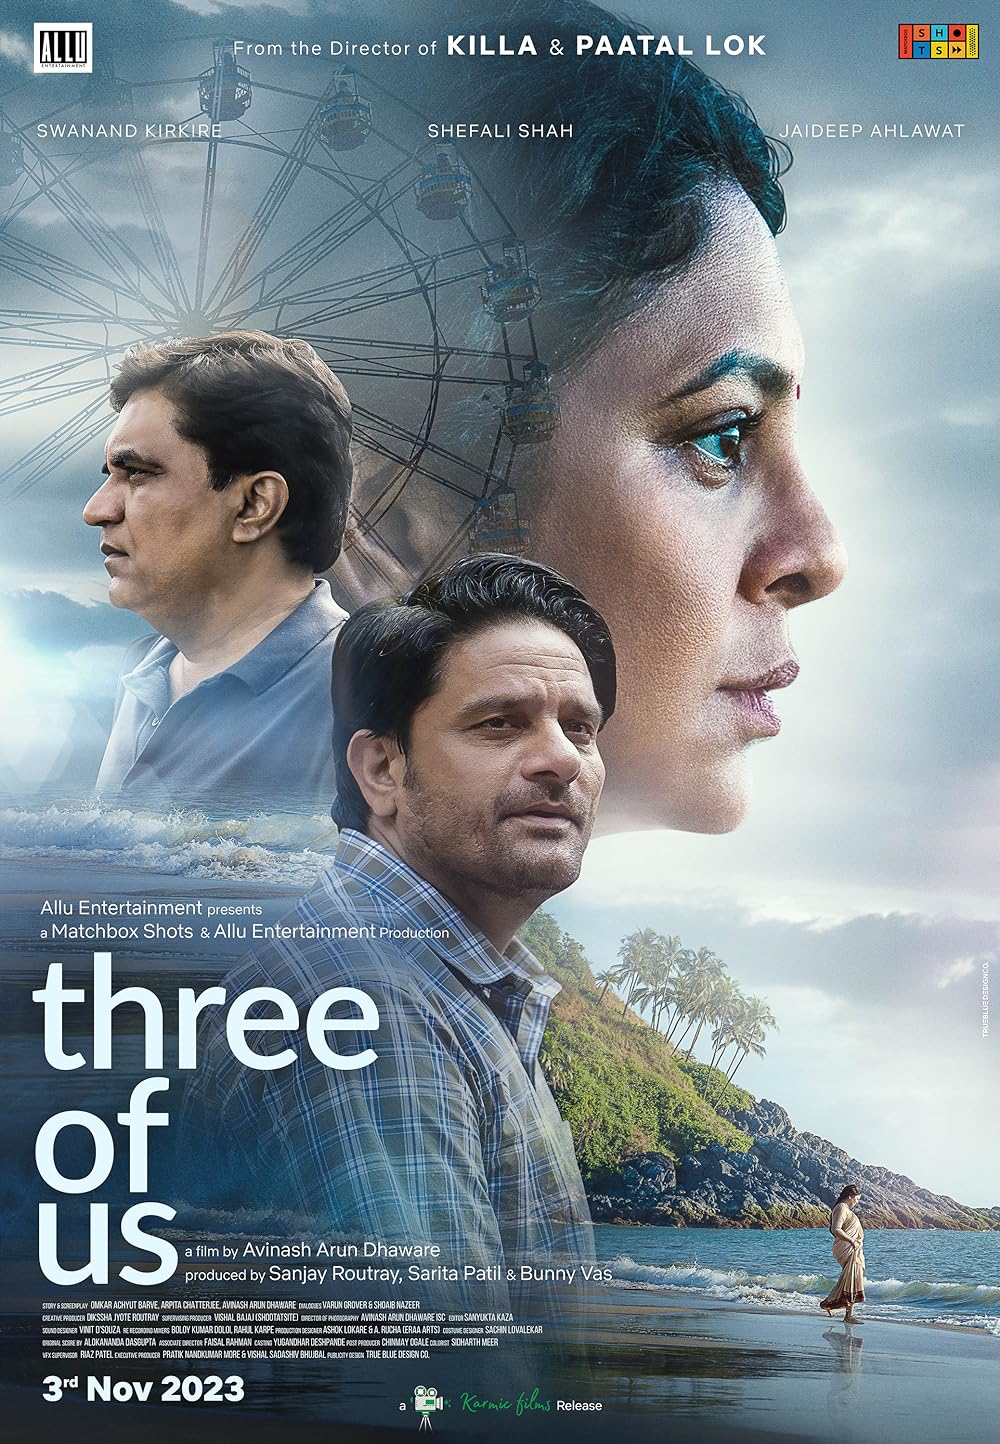 Three of Us (December 29) - Streaming on NetflixThree of Us follows Shailaja as she confronts early dementia symptoms by revisiting her childhood town, embarking on a journey of confronting the past, the complexities of her marriage, and seeking liberation.